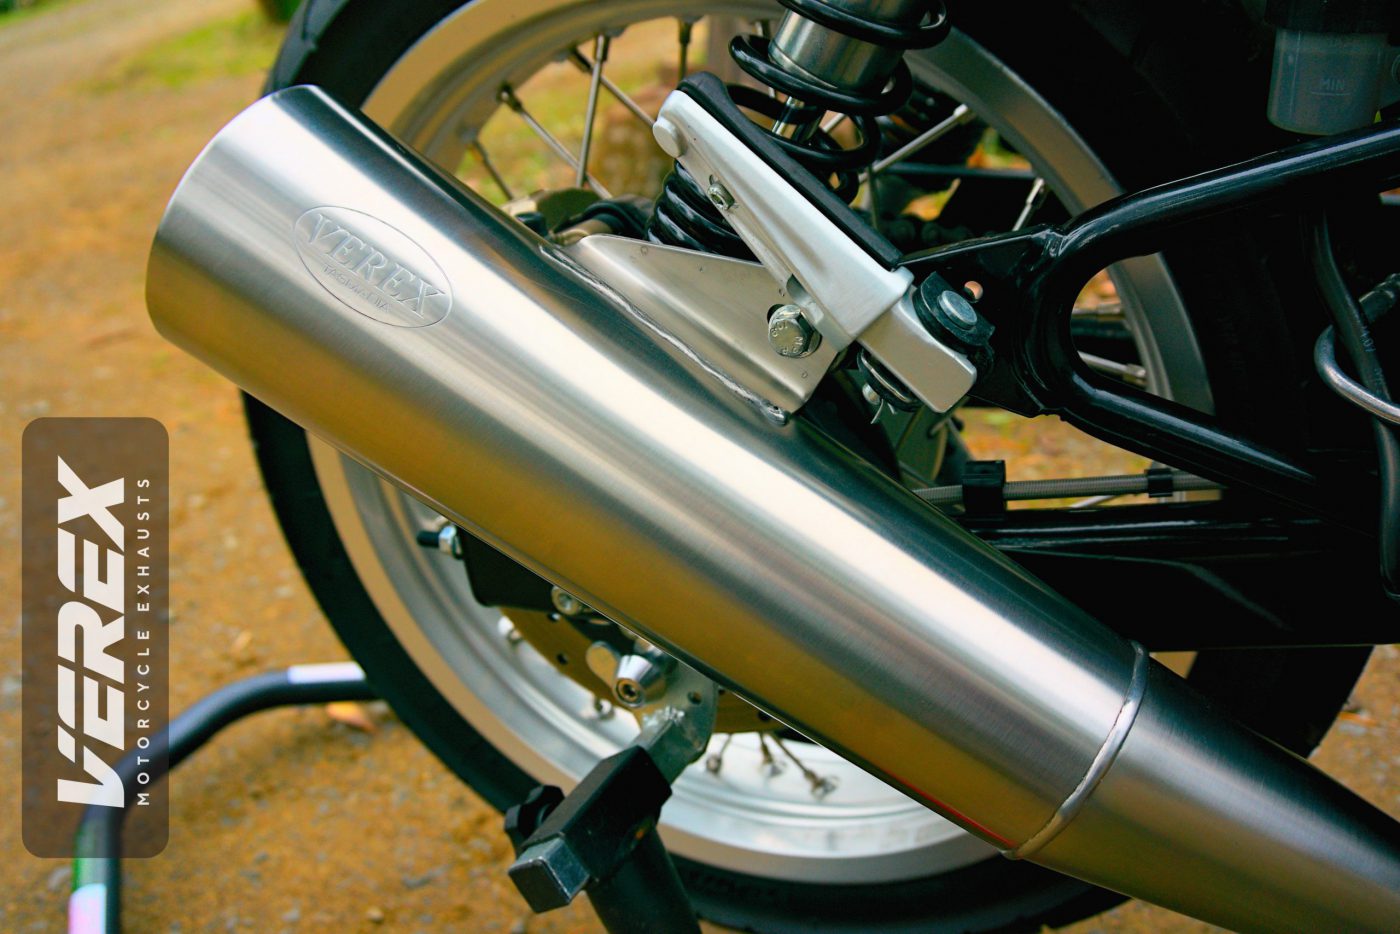 Royal Enfield 650 Australian Made Motorcycle Exhaust